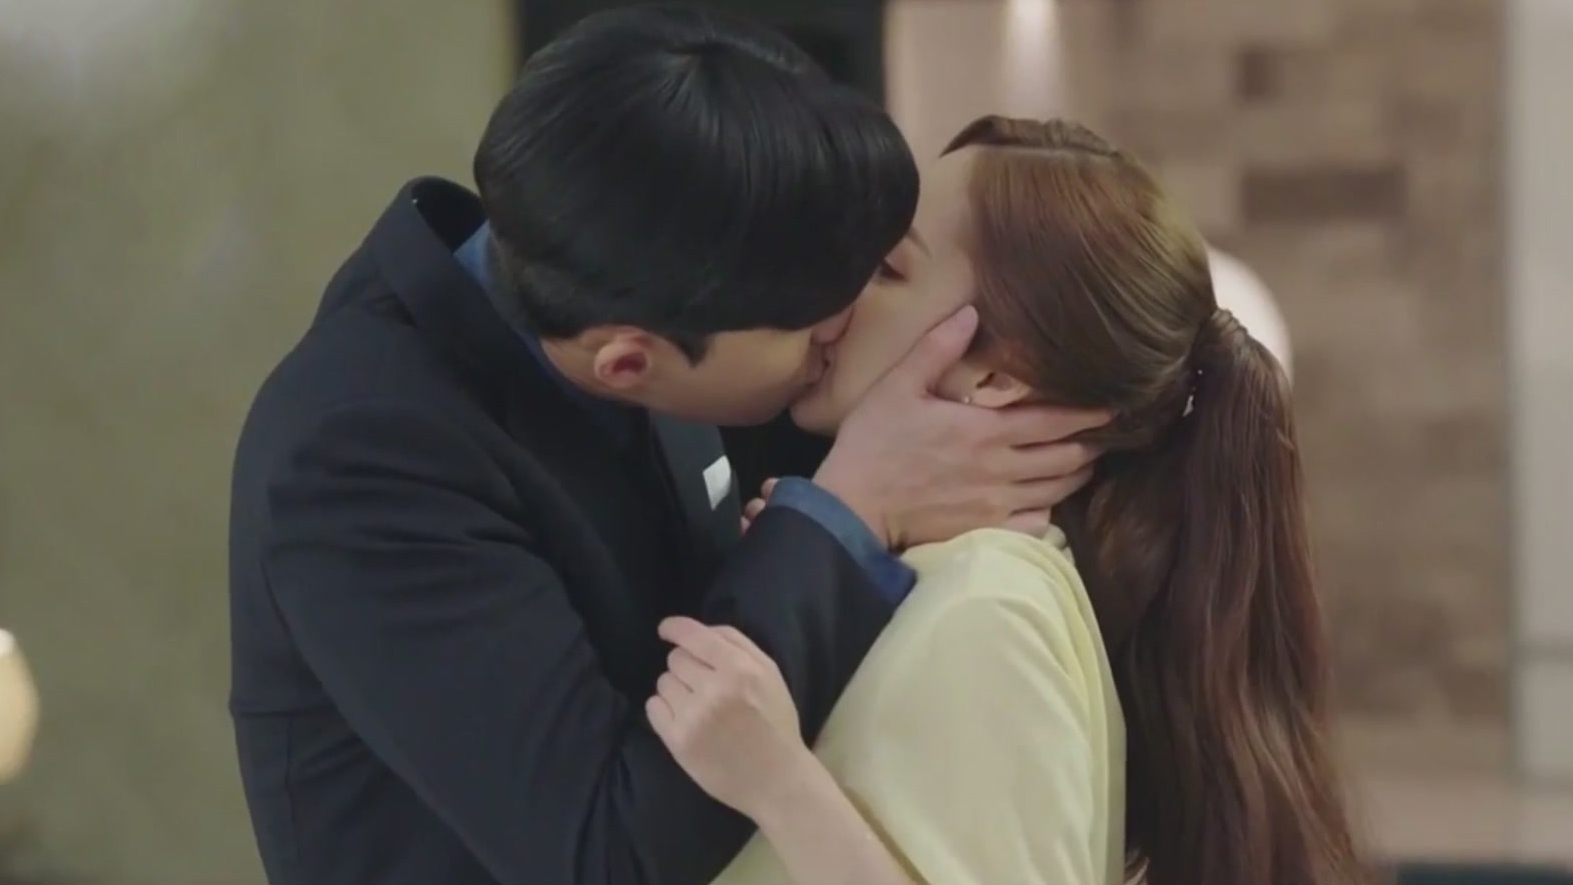 What's Wrong With Secretary Kim - Seo-Joon Park and Min-young Park